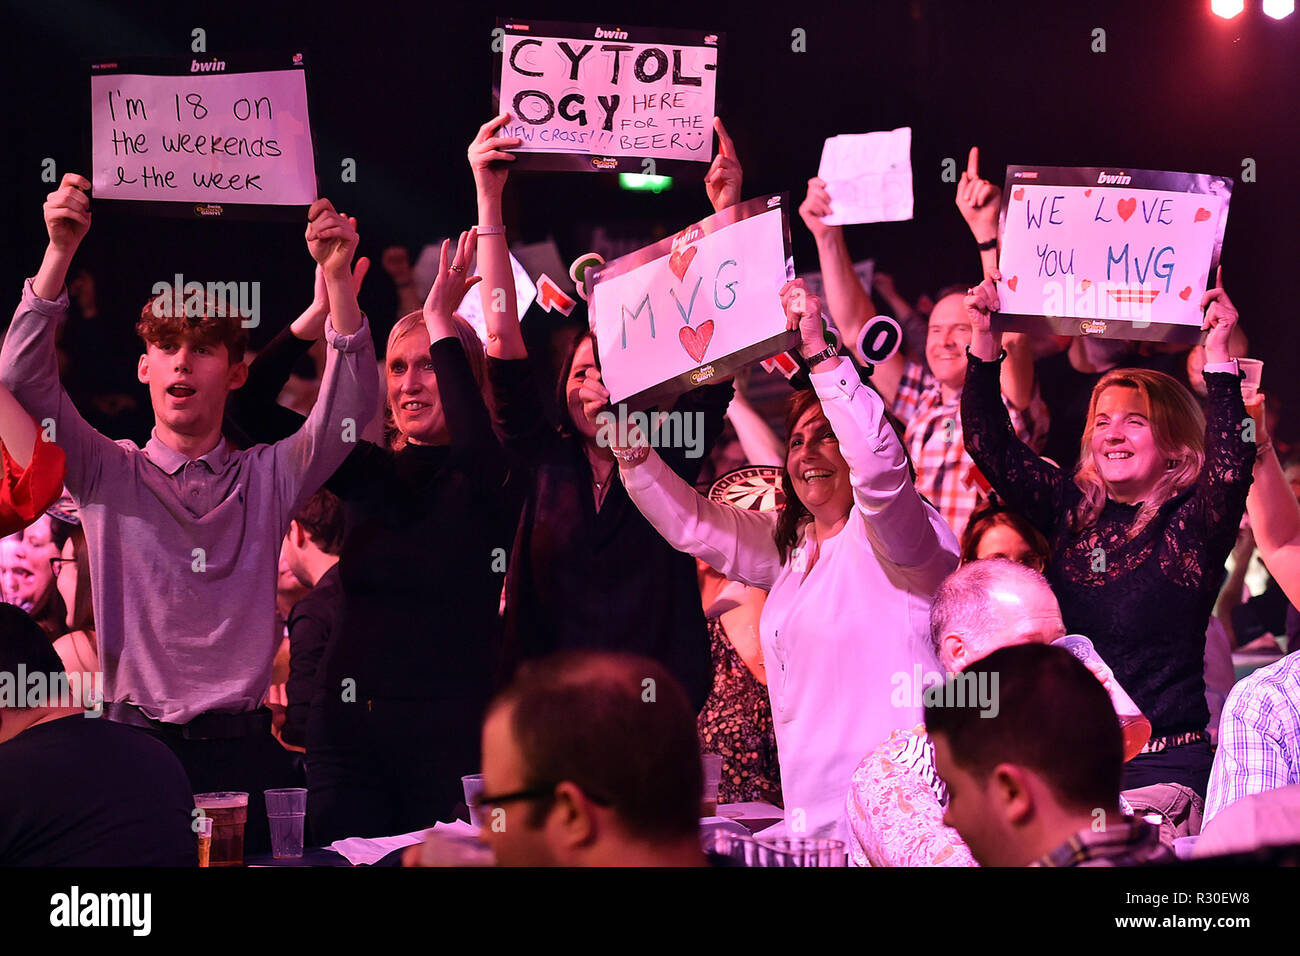 Wolverhampton, United Kingdom. 15th November 2018. Spectators during the BWIN  Grand Slam of Darts Group stage